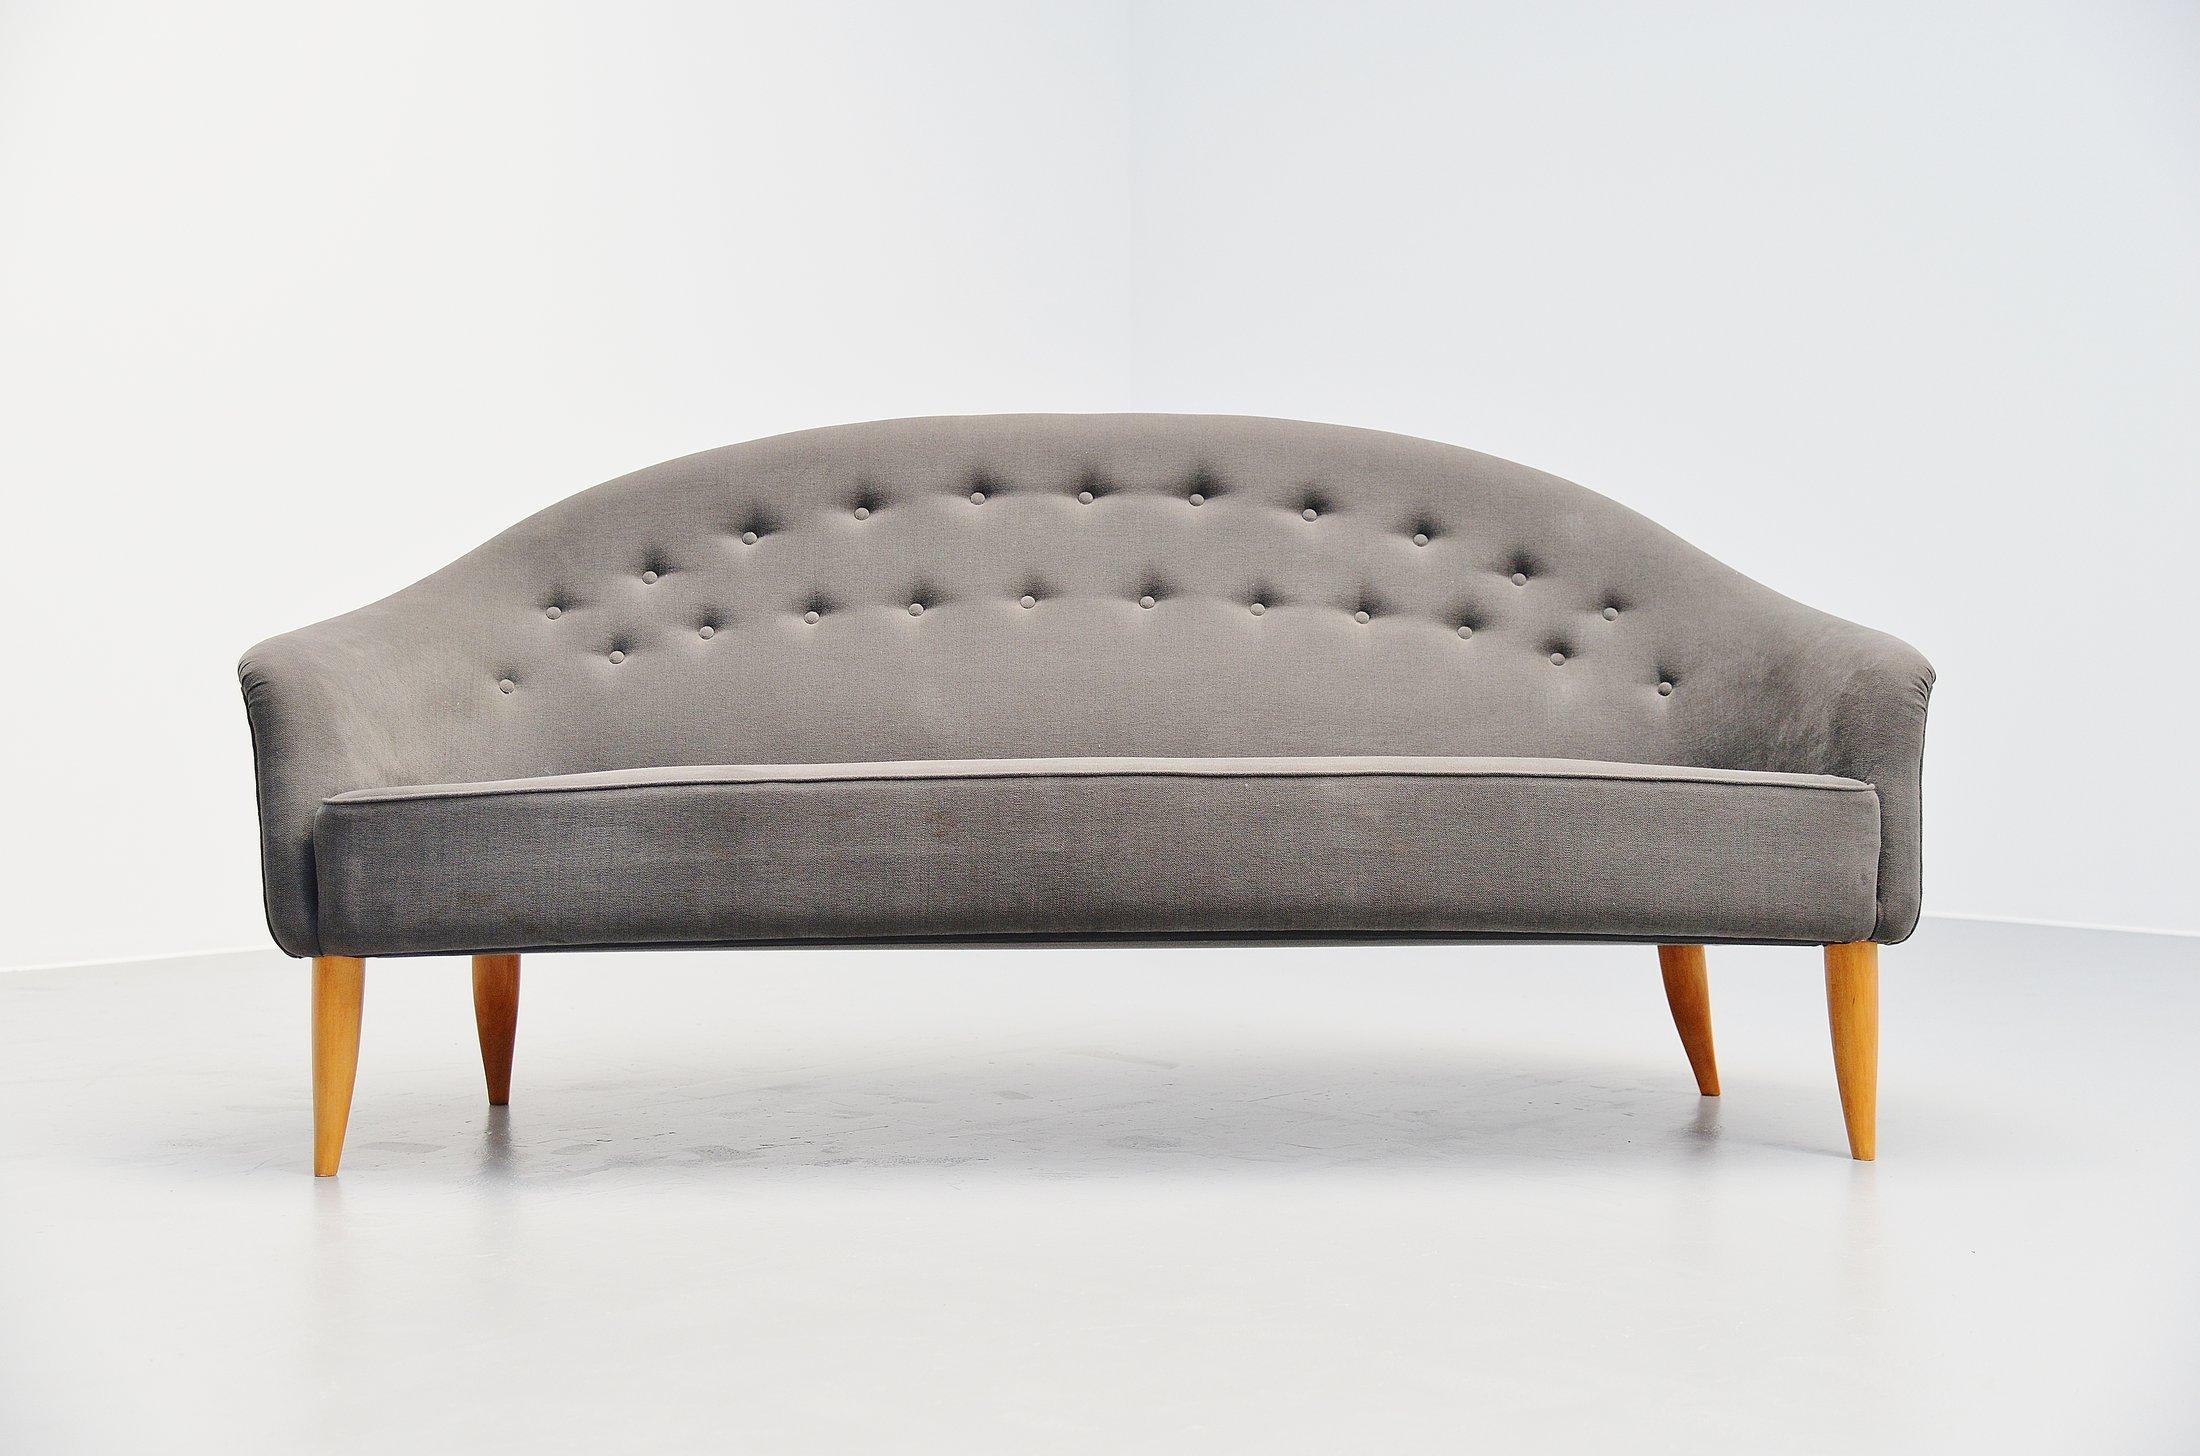 Stunning paradise sofa designed by Kerstin Hörlin-Holmquist for Nordiska Kompaniet, Sweden, 1958. This sofa has very nice typical for that time organic shapes, and curved organic legs. Scandinavian sophistication is strongly visible in this design.